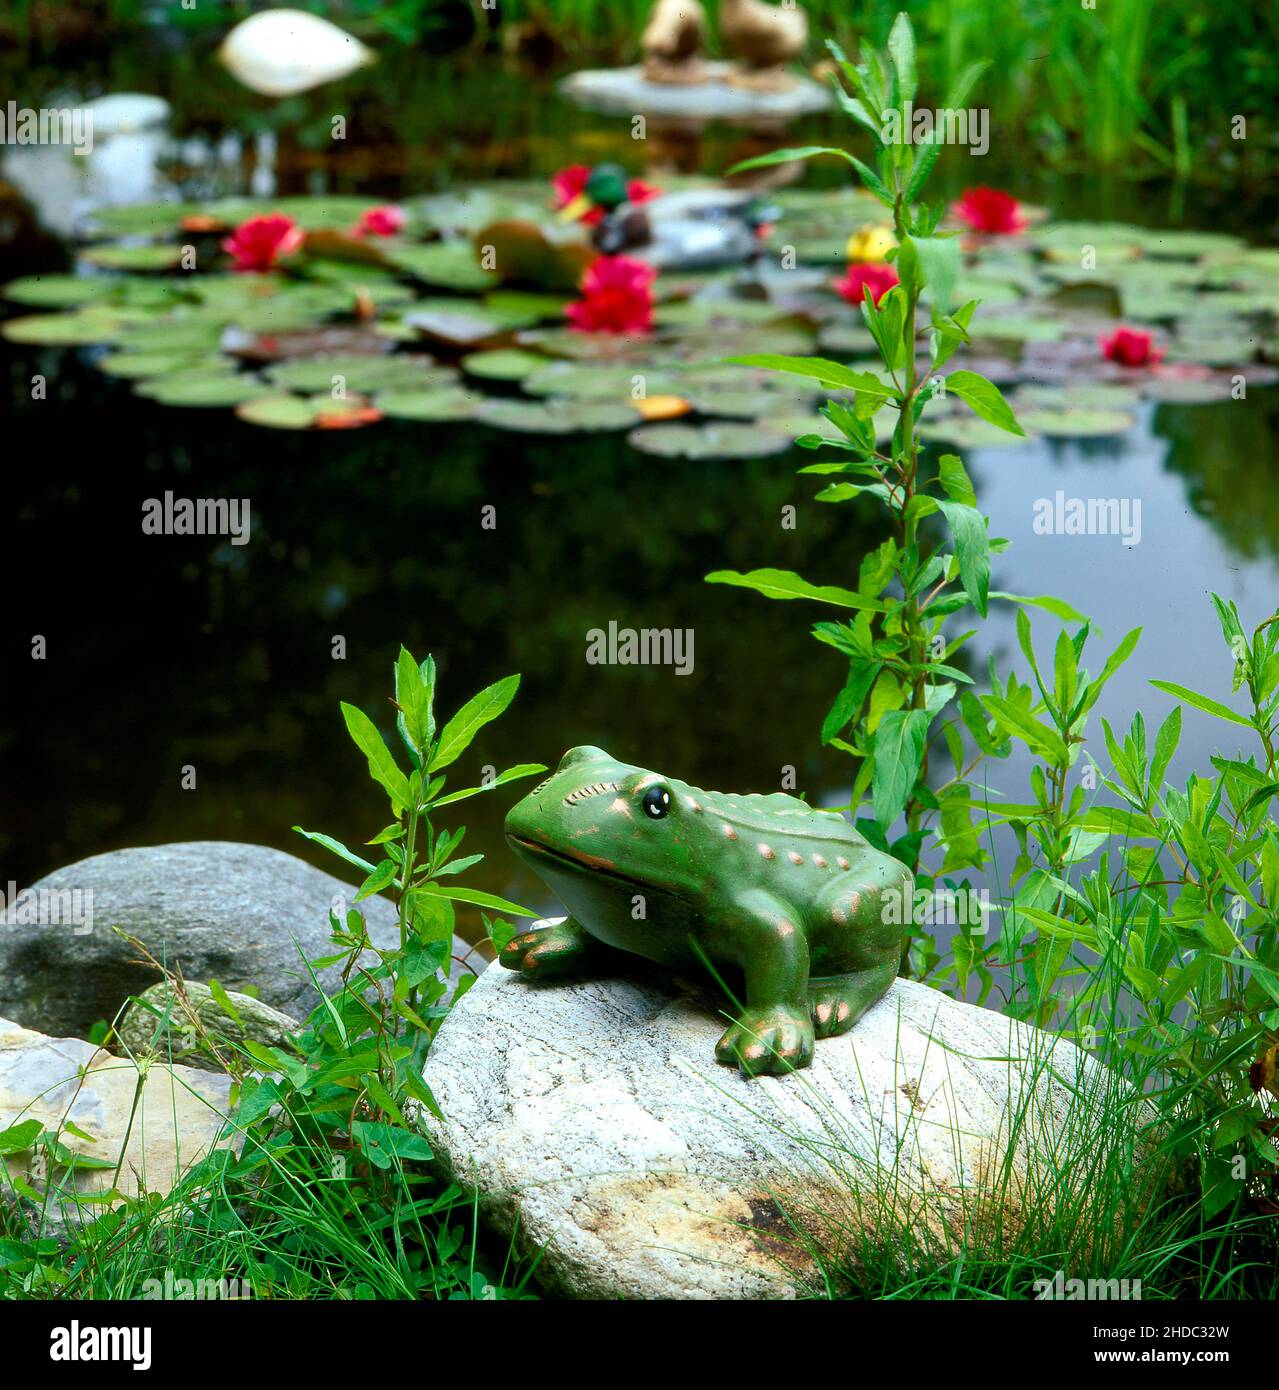 Frog figure in the garden pond, water lily pond in the summer garden, Frog figure in the garden pond, water lily pond in the summer garden Stock Photo